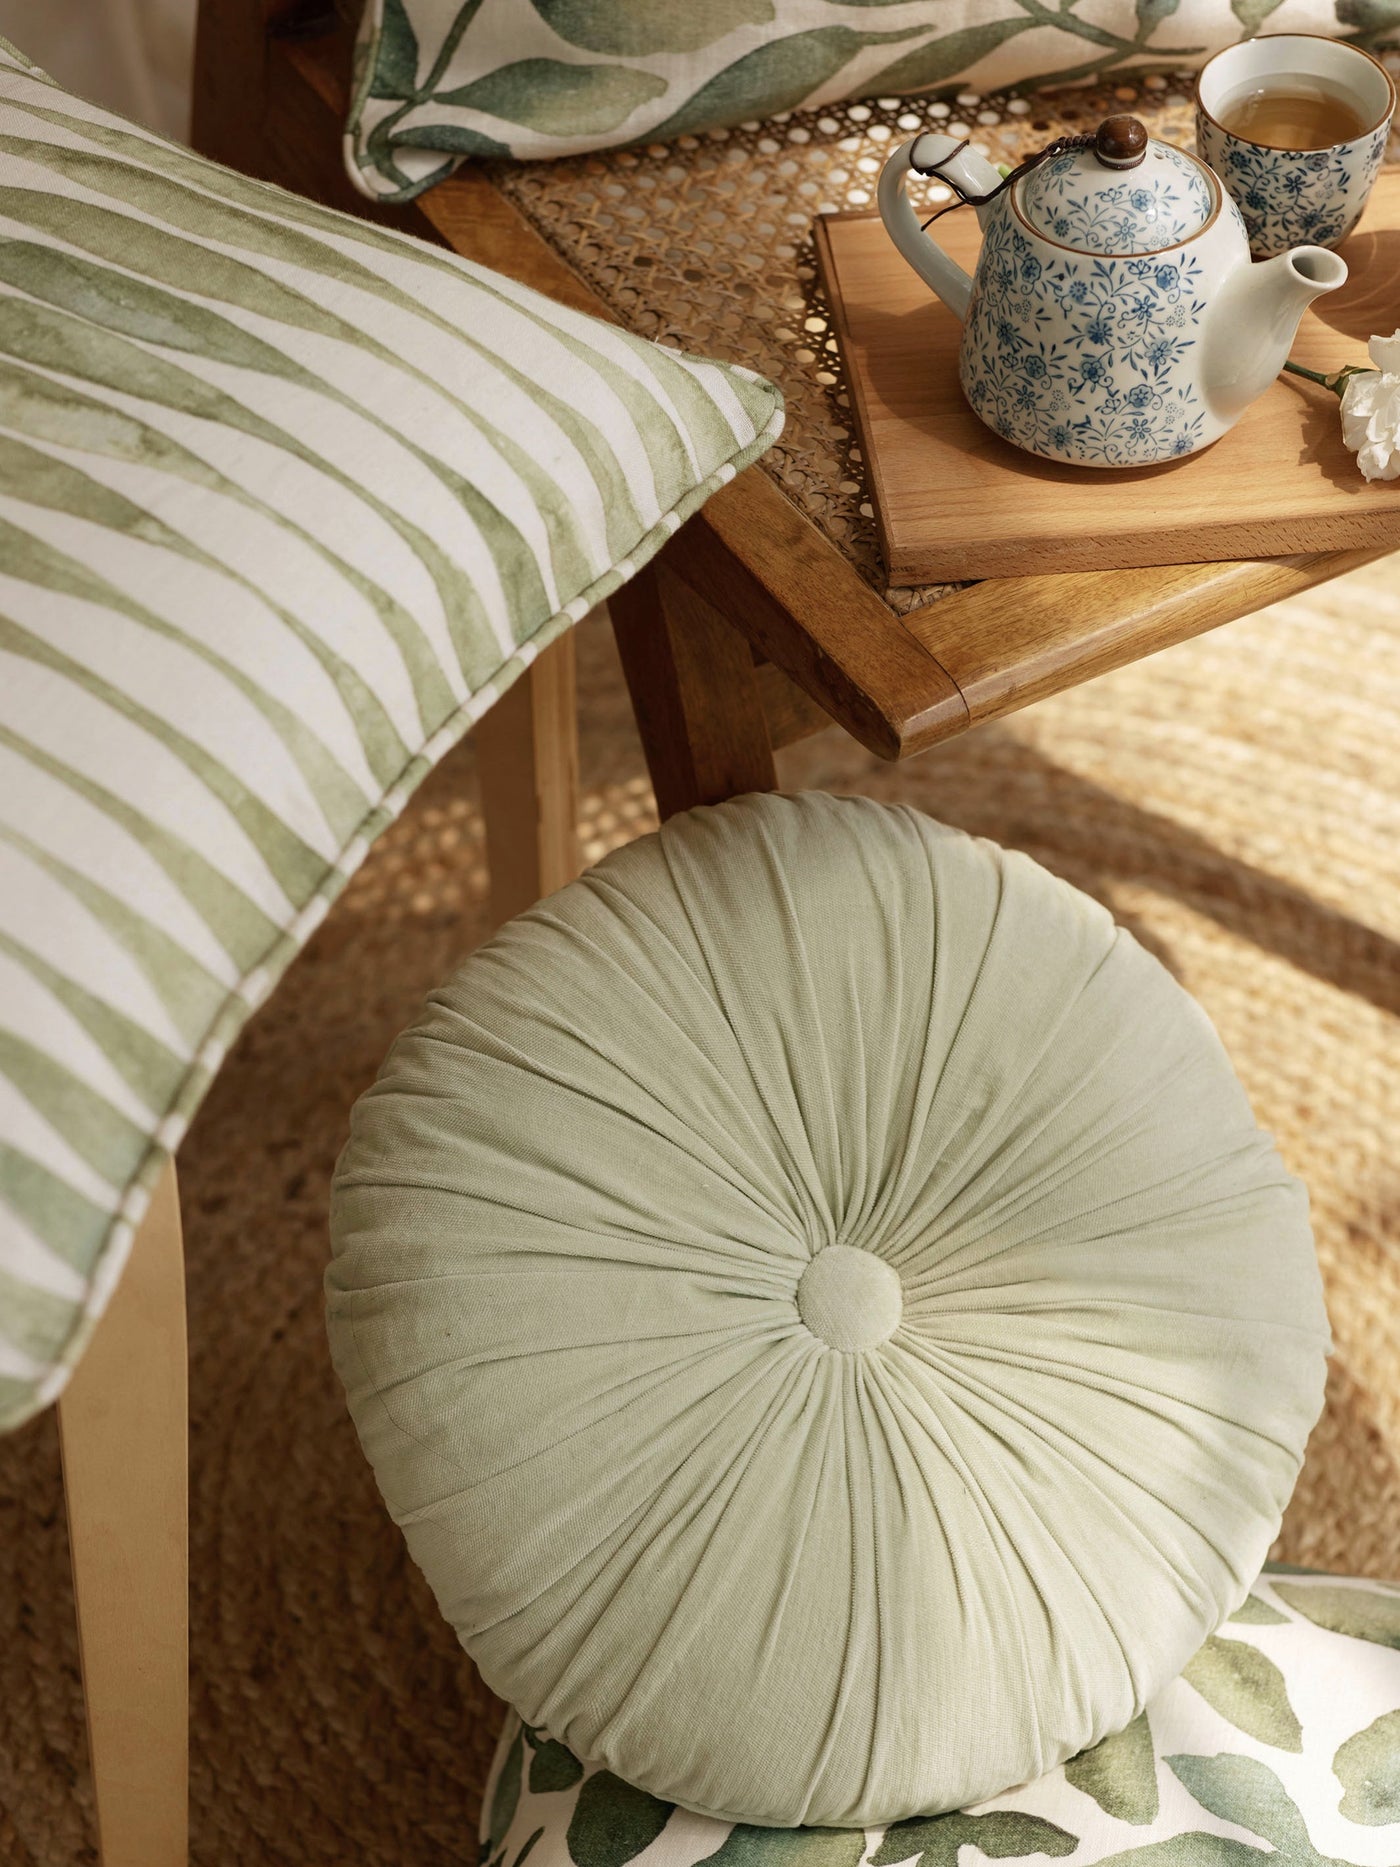 Cushion Cover - Ripple Sage Oblong Linen